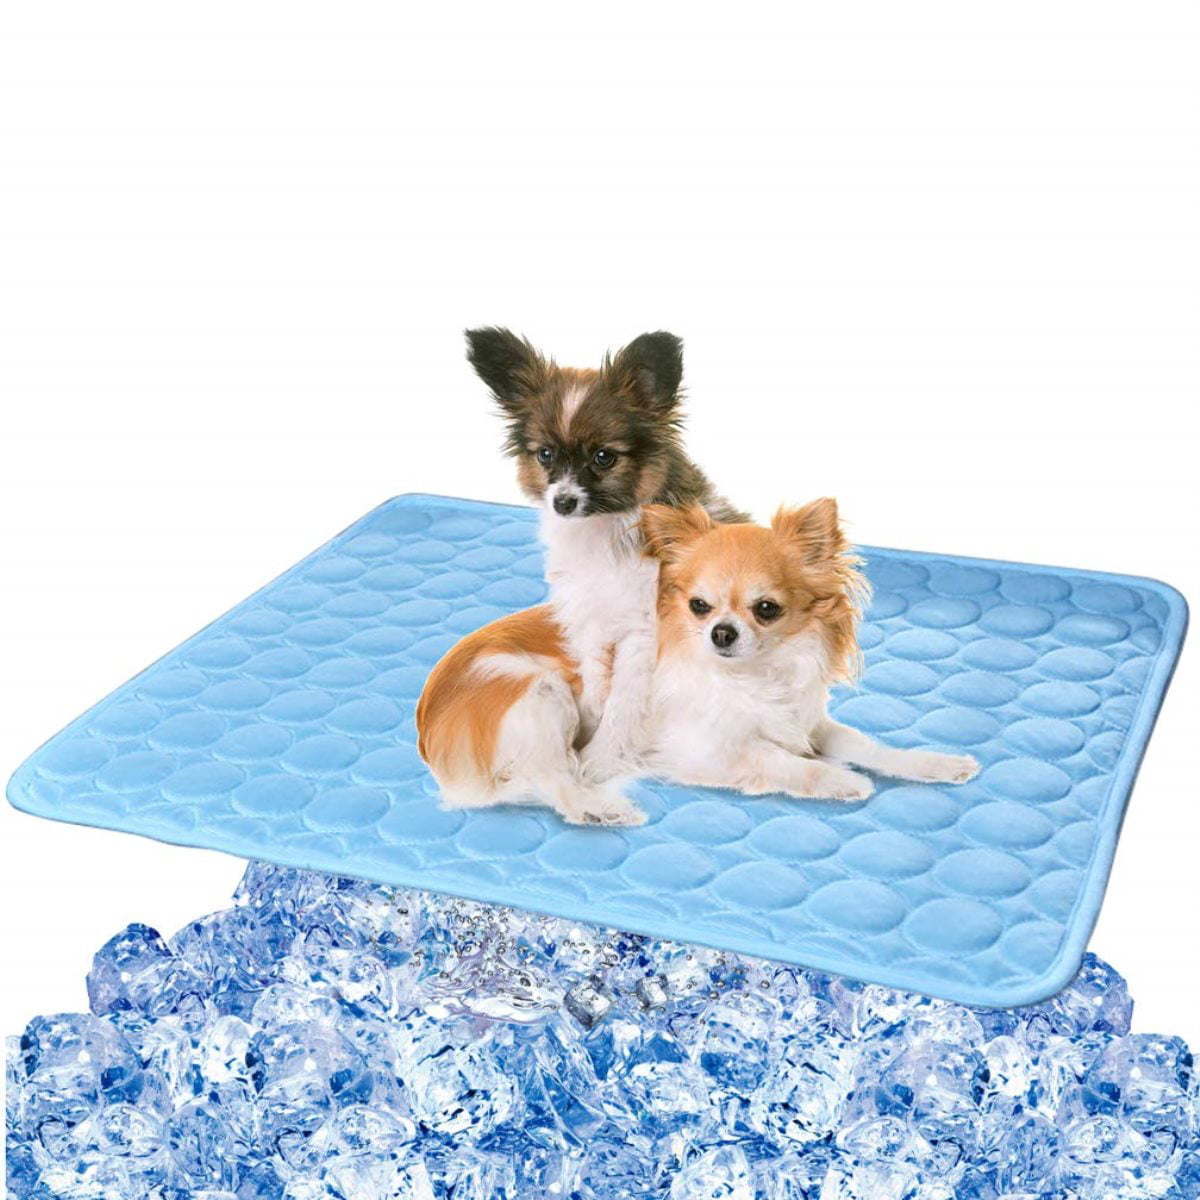 PUMYPOREITY Pet Cooling Pad Extra Large Dog Summer Sleeping Mat Pet Cats Cooling Blanket Sleep Cushion Pet Supplies Keep Pets Cool Comfort for Cats and Dogs for Kennel Sofa Bed Floor Travel Car Seats 